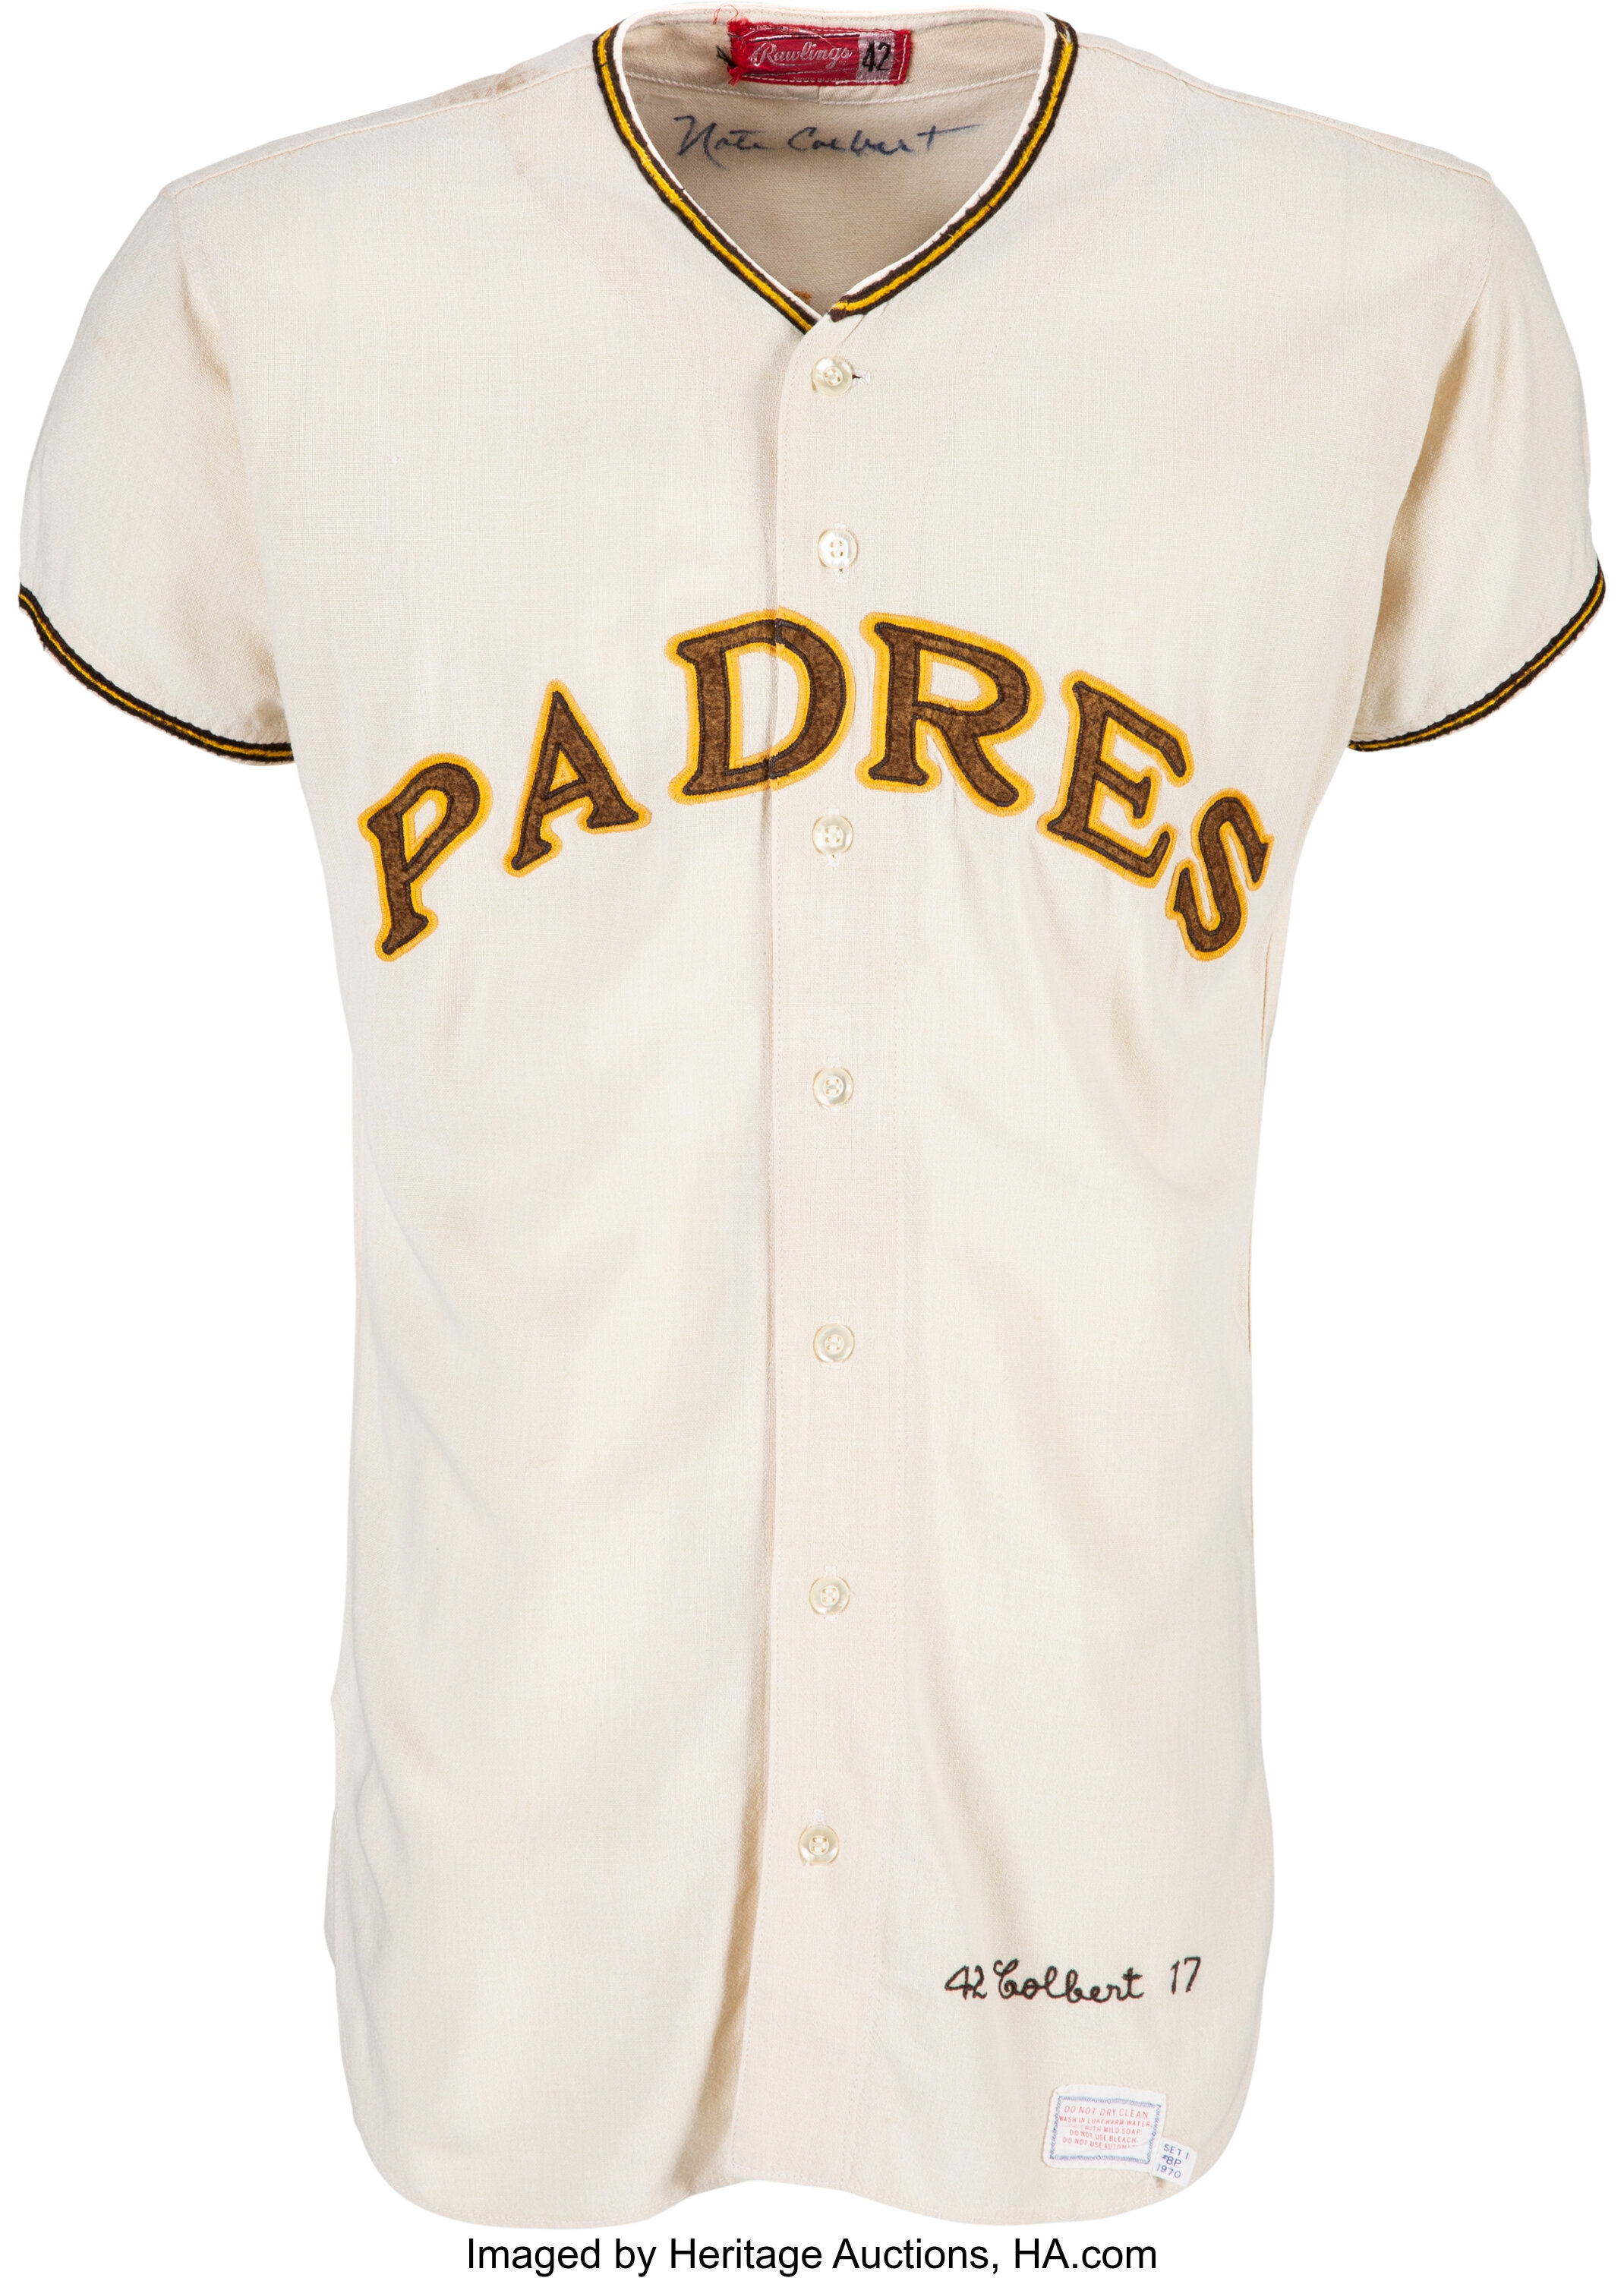 1970 Nate Colbert Game Worn & Signed San Diego Padres Jersey